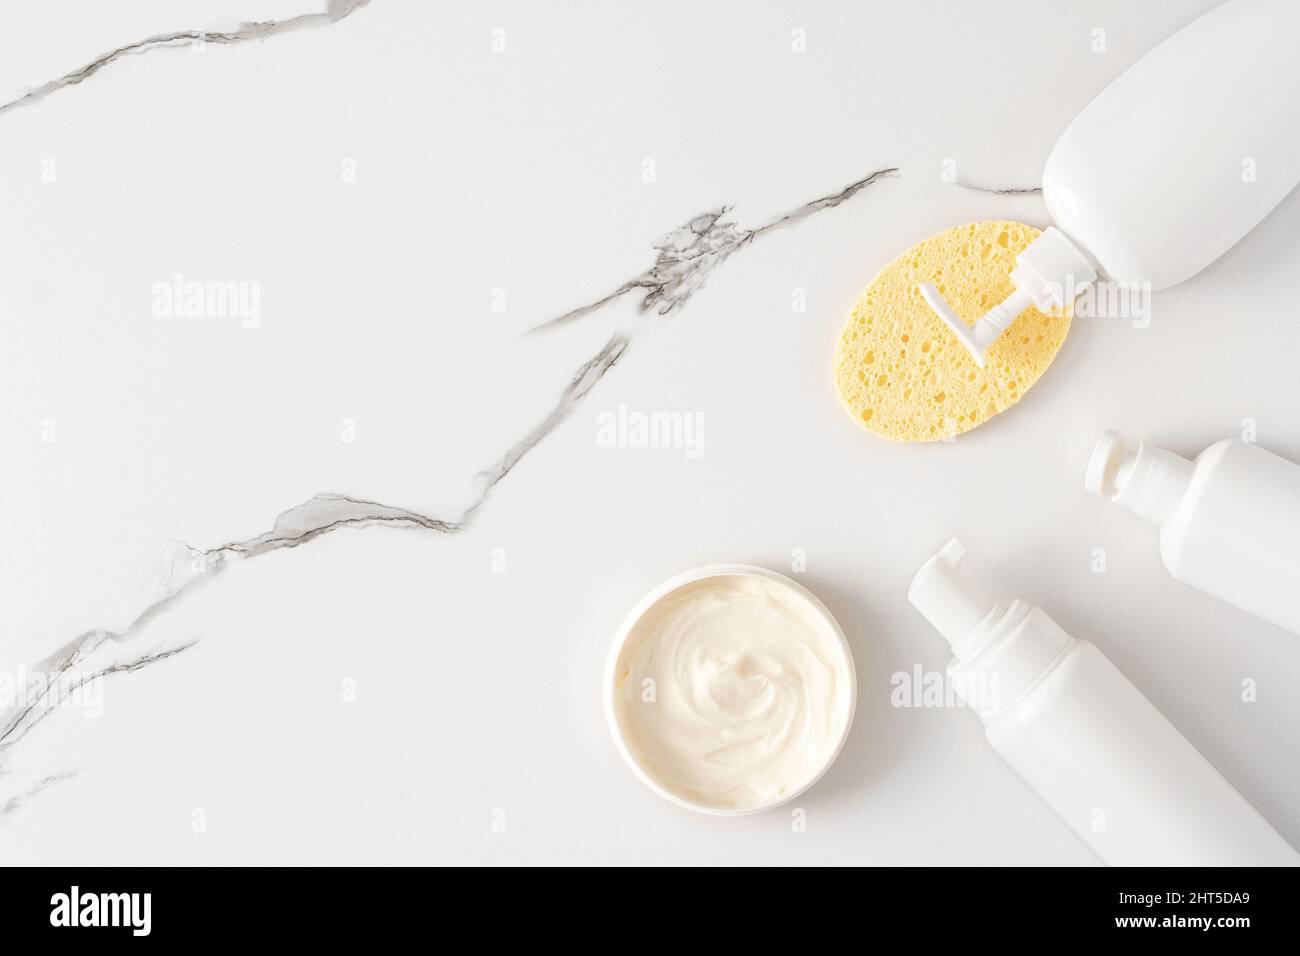 Facial cleanser, face wash product bottles with face cleansing sponge on marble background. Top view, flat lay. Copy space Stock Photo